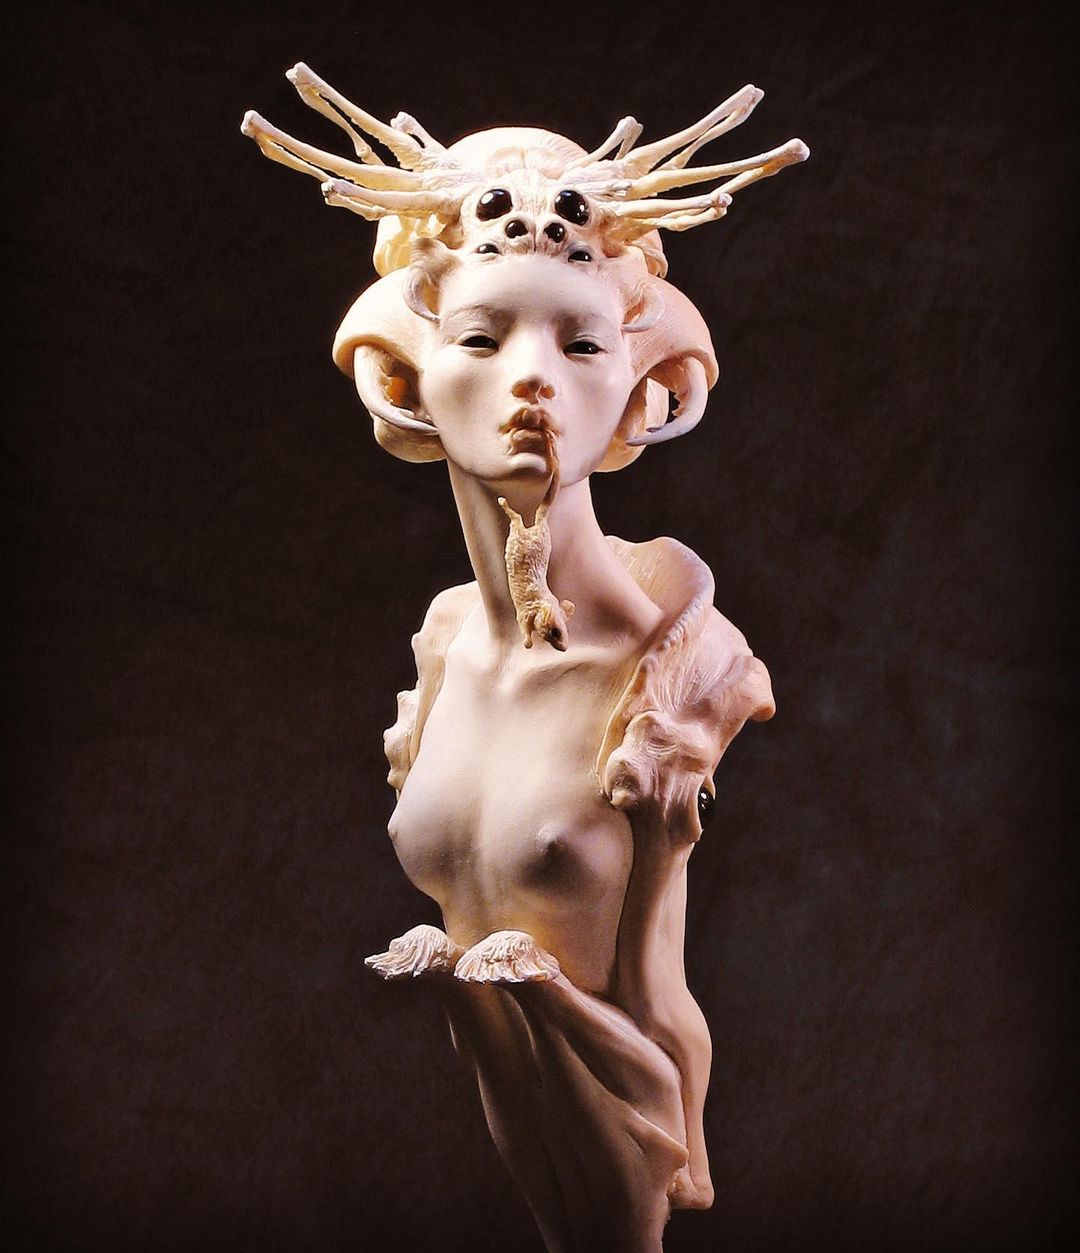 Magical Surreal And Allegorical Sculptures Of Fantastical Beings By Forest Rogers 9